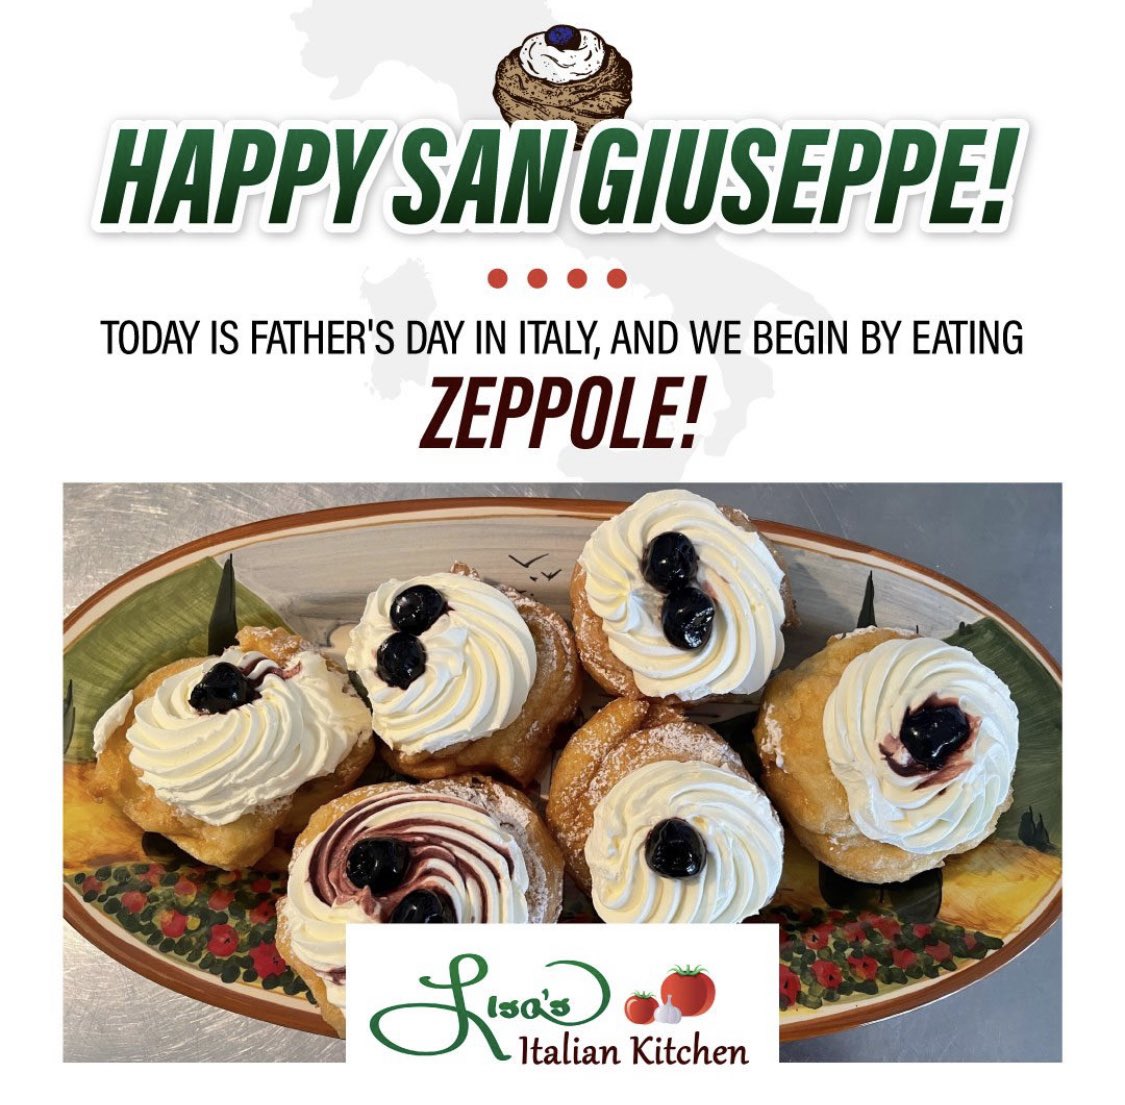 Happy San Giuseppe to all the wonderful and dedicated fathers out there, especially in Italy, and especially Lisa’s- the great A. Robert Caponigri. #happyfathersday #sangiuseppe #italianfathersday #zeppole #zeppoledisangiuseppe ❤️🇮🇹